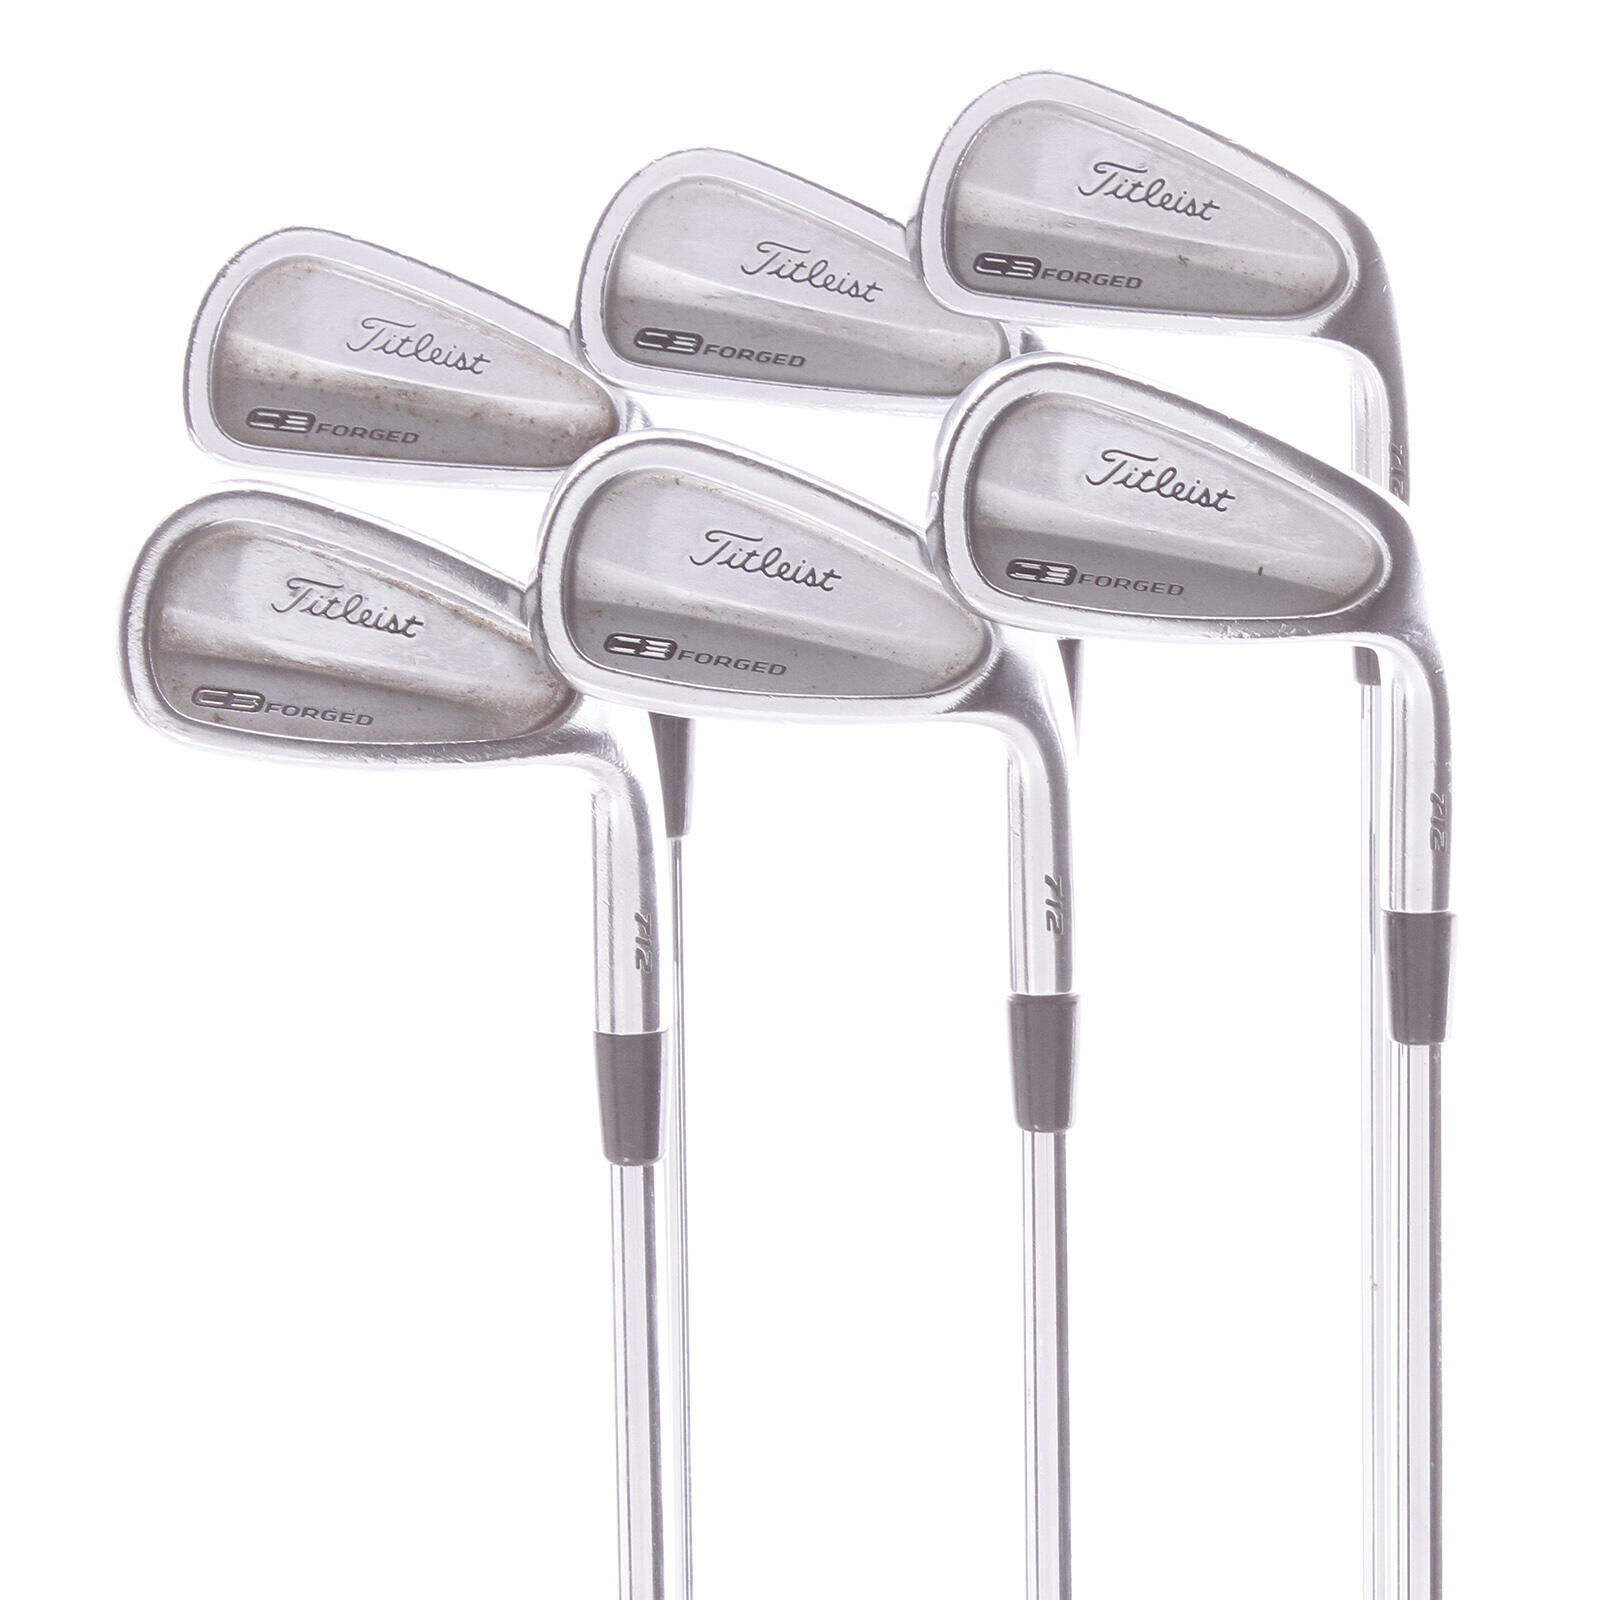 TITLEIST USED - Iron Set 5-PW Titleist 712 CB Forged Steel Shaft Right Handed - GRADE B